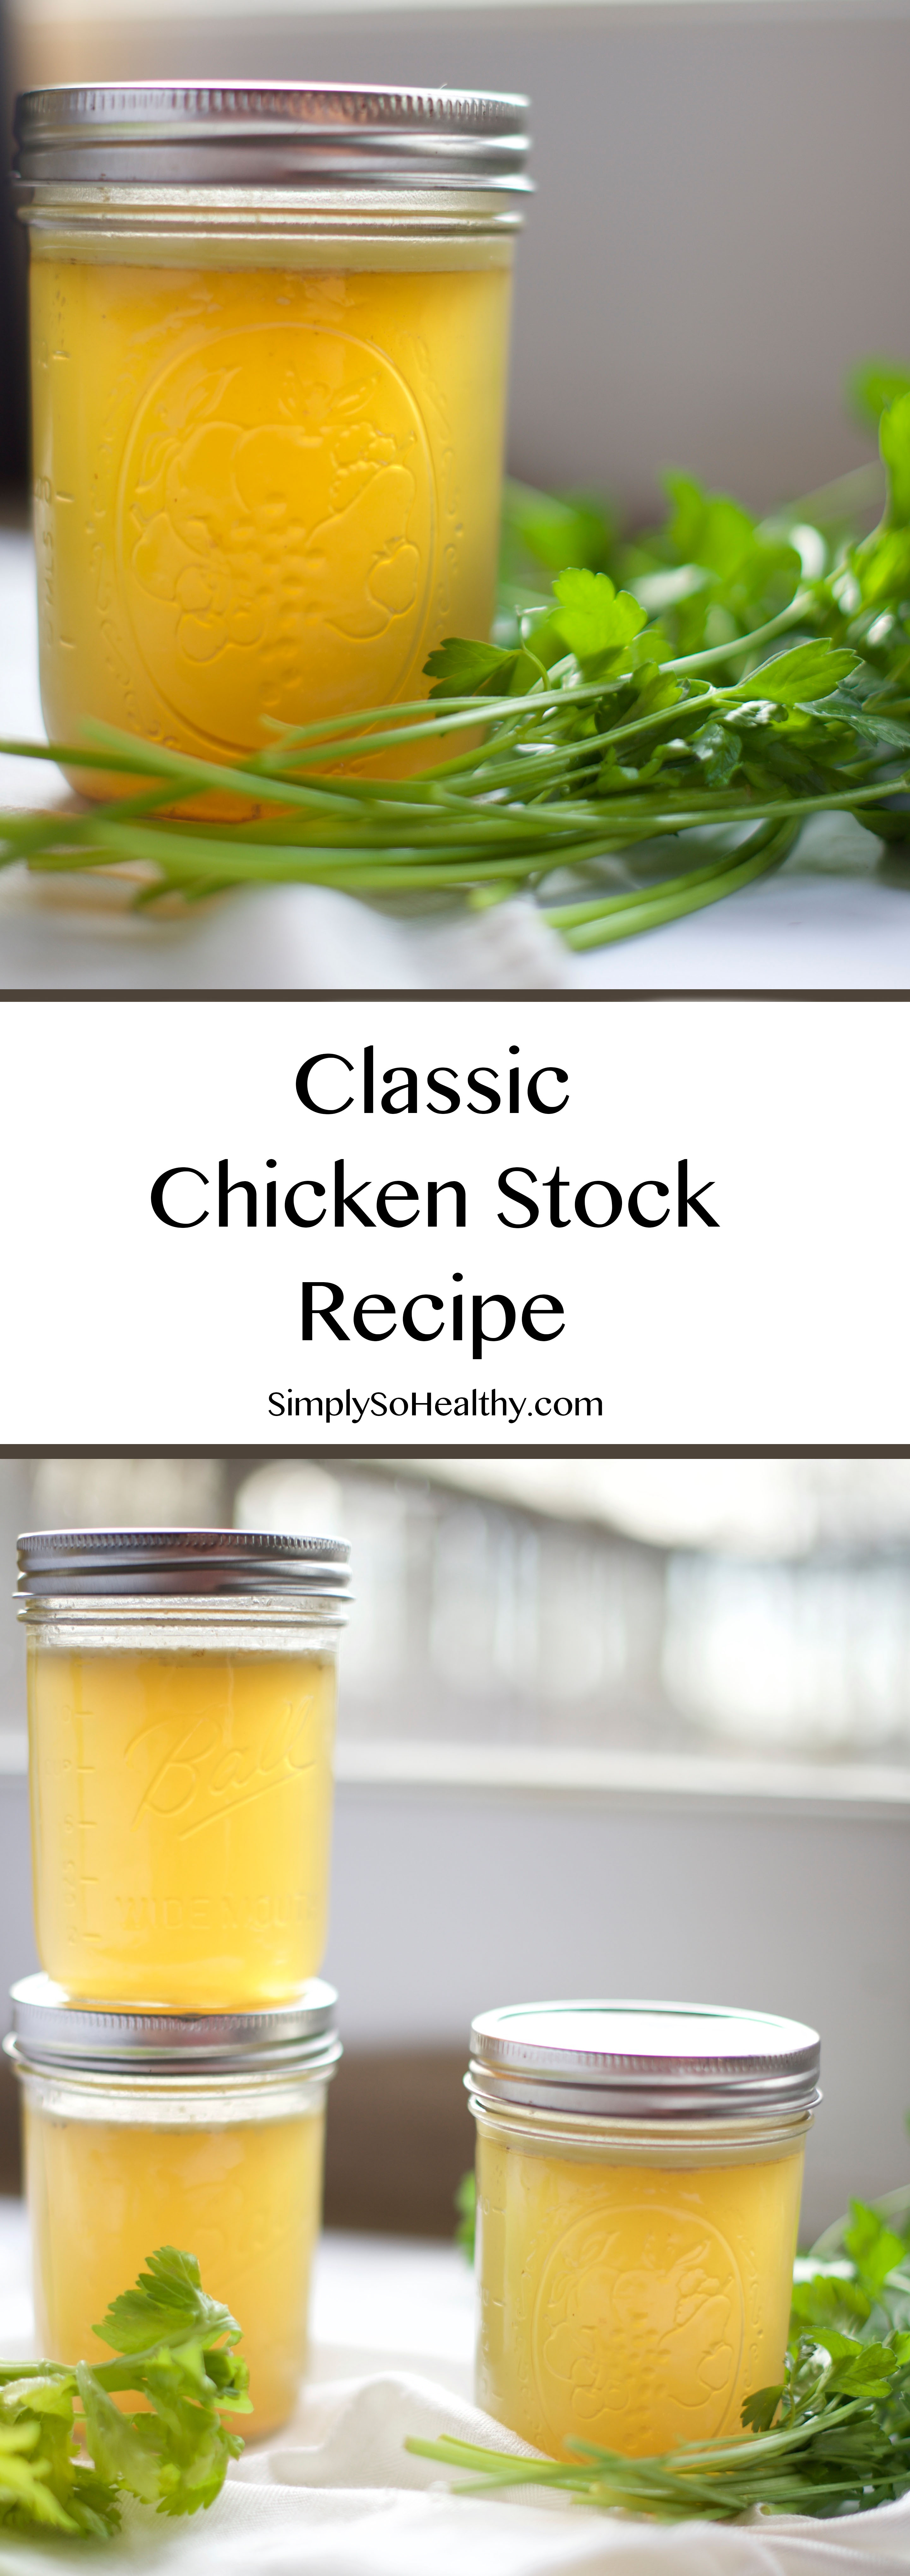 Photo of Classic Chicken Stock with blog text.